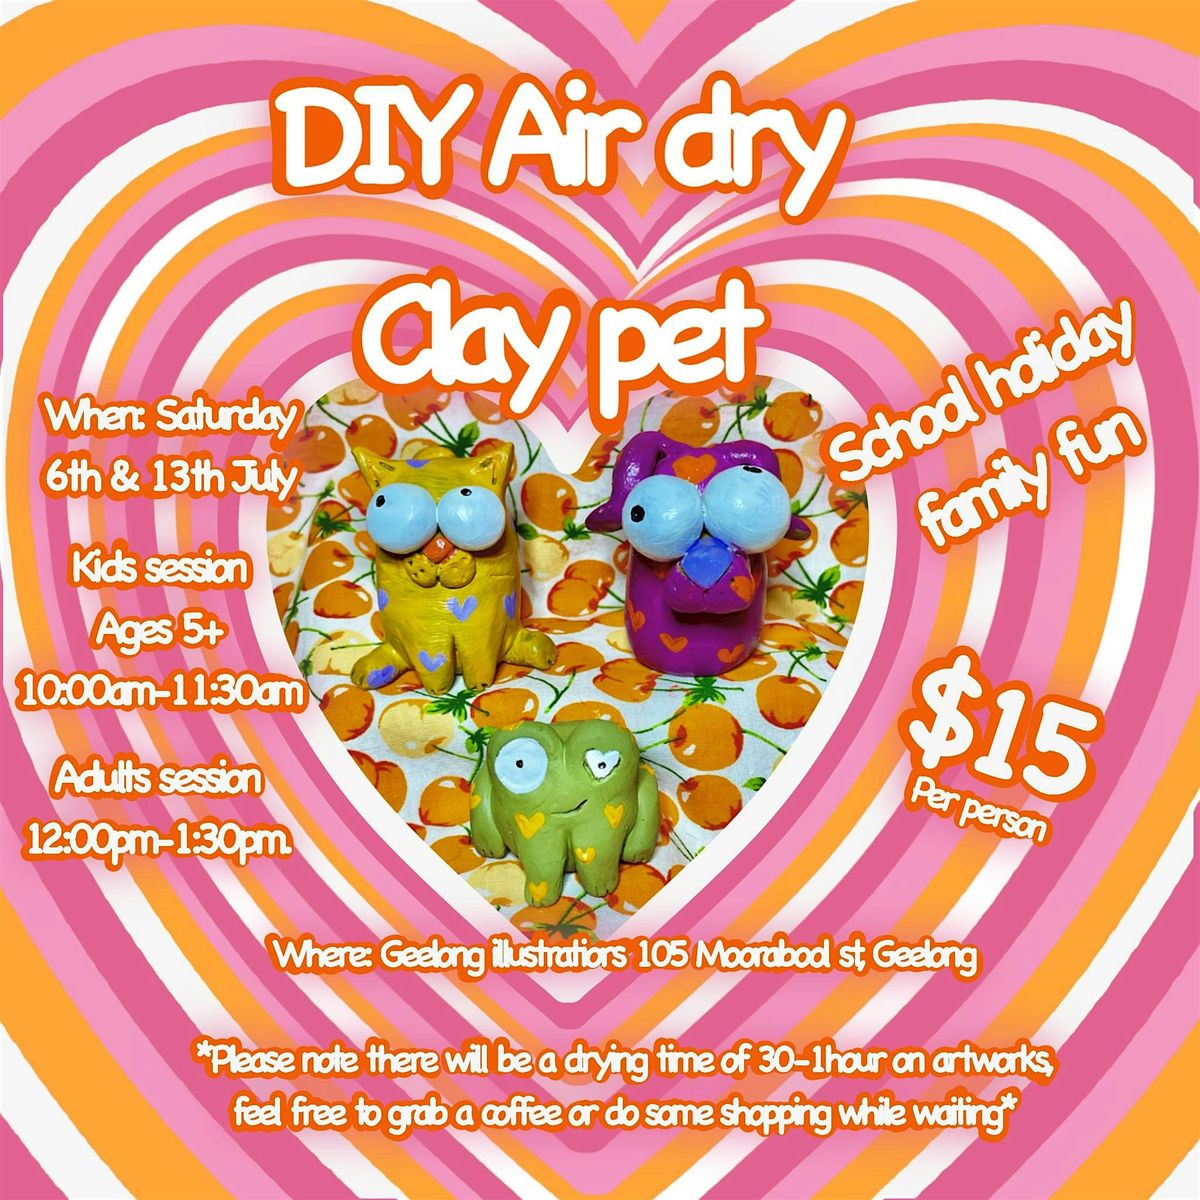 DIY Air dry clay pet - adults session